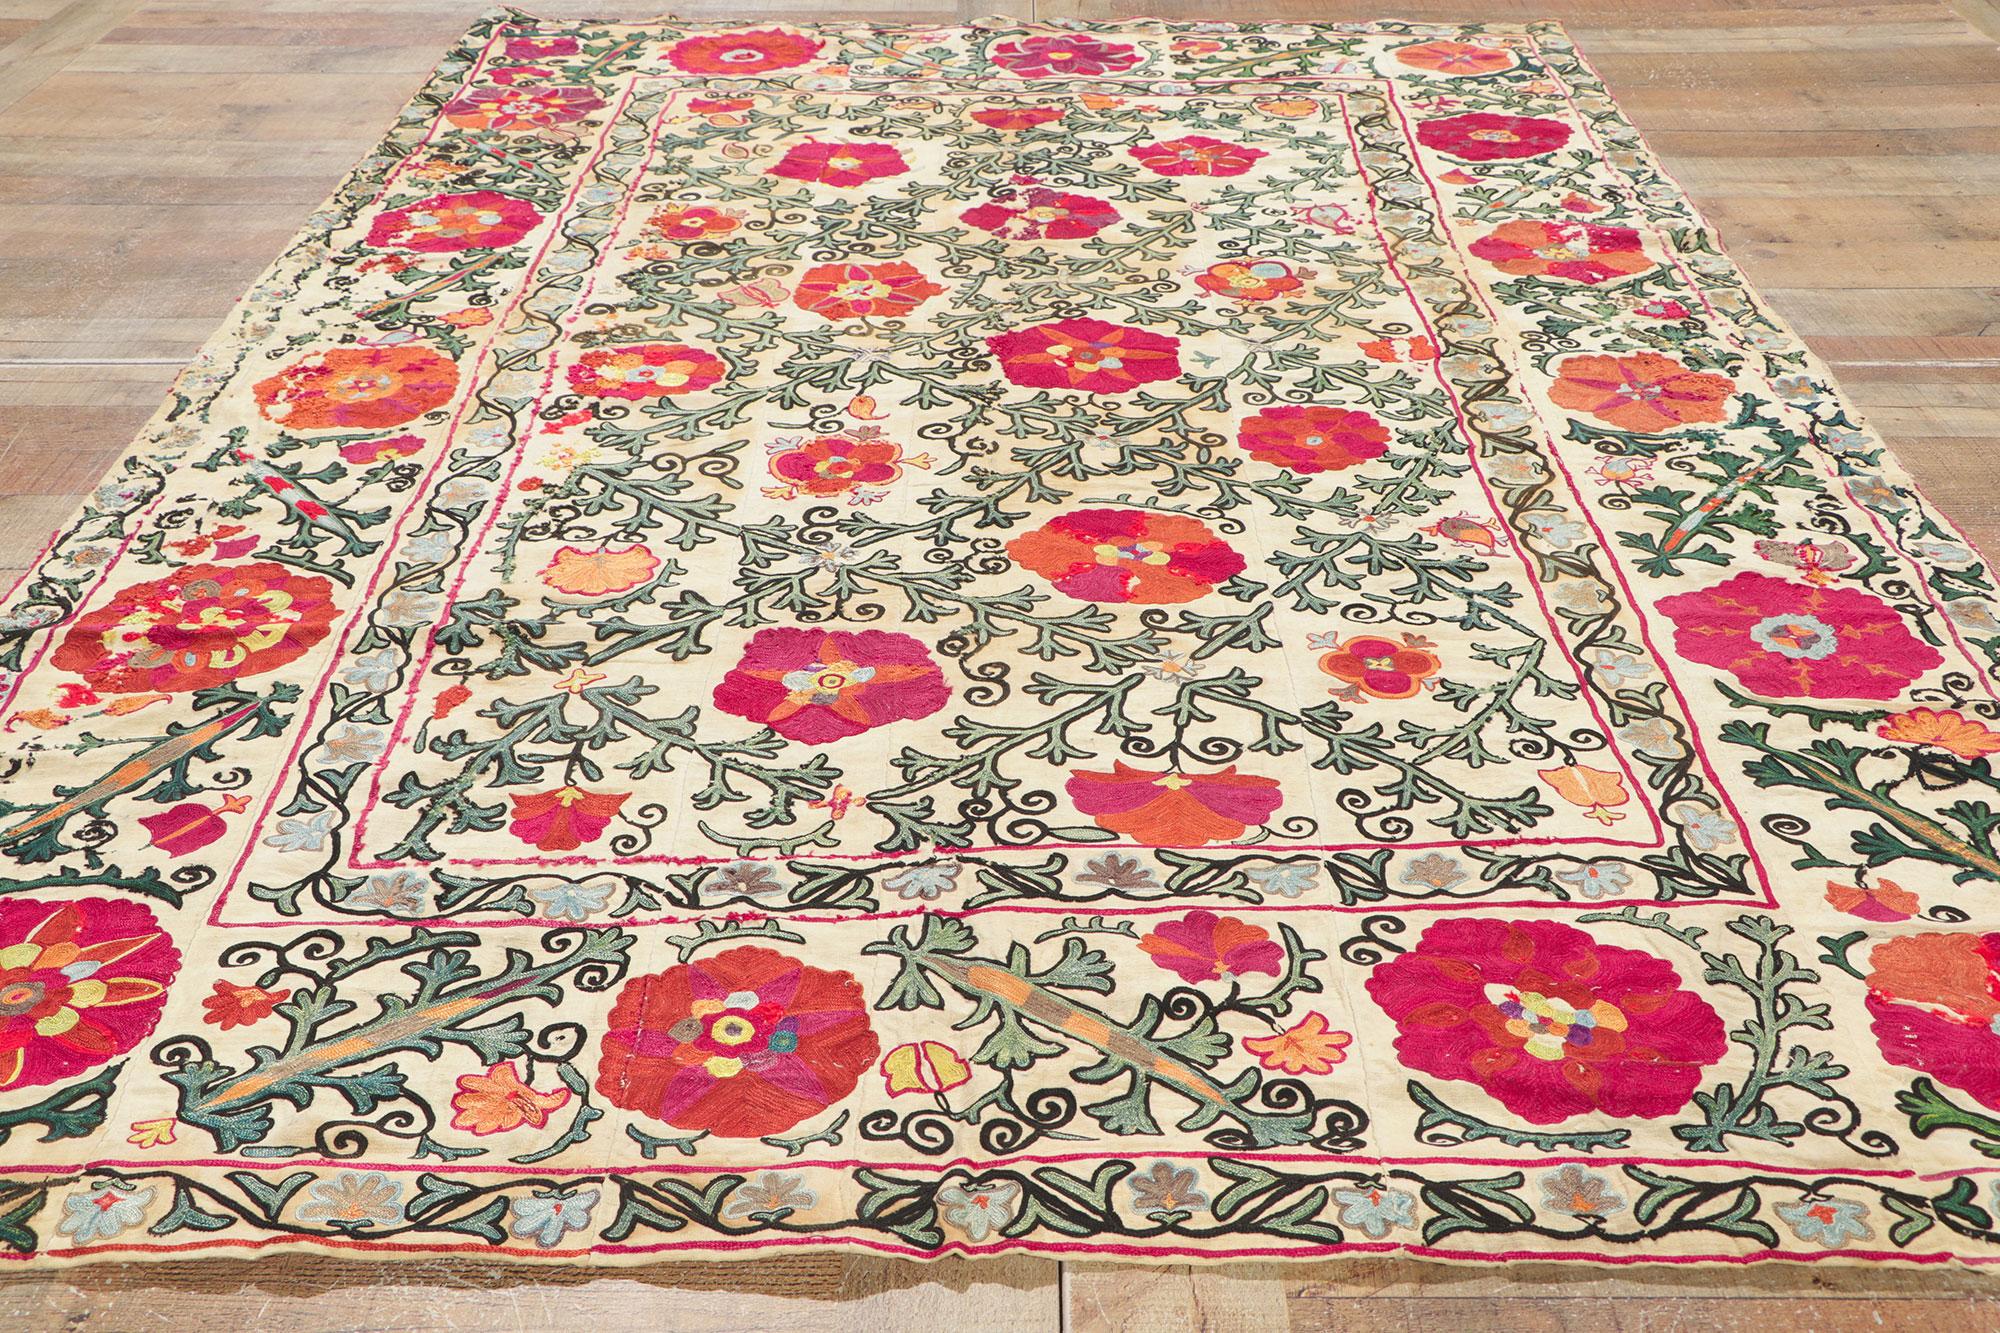 Antique Uzbek Bukhara Suzani Textile, Embroidered Wall Tapestry For Sale 2